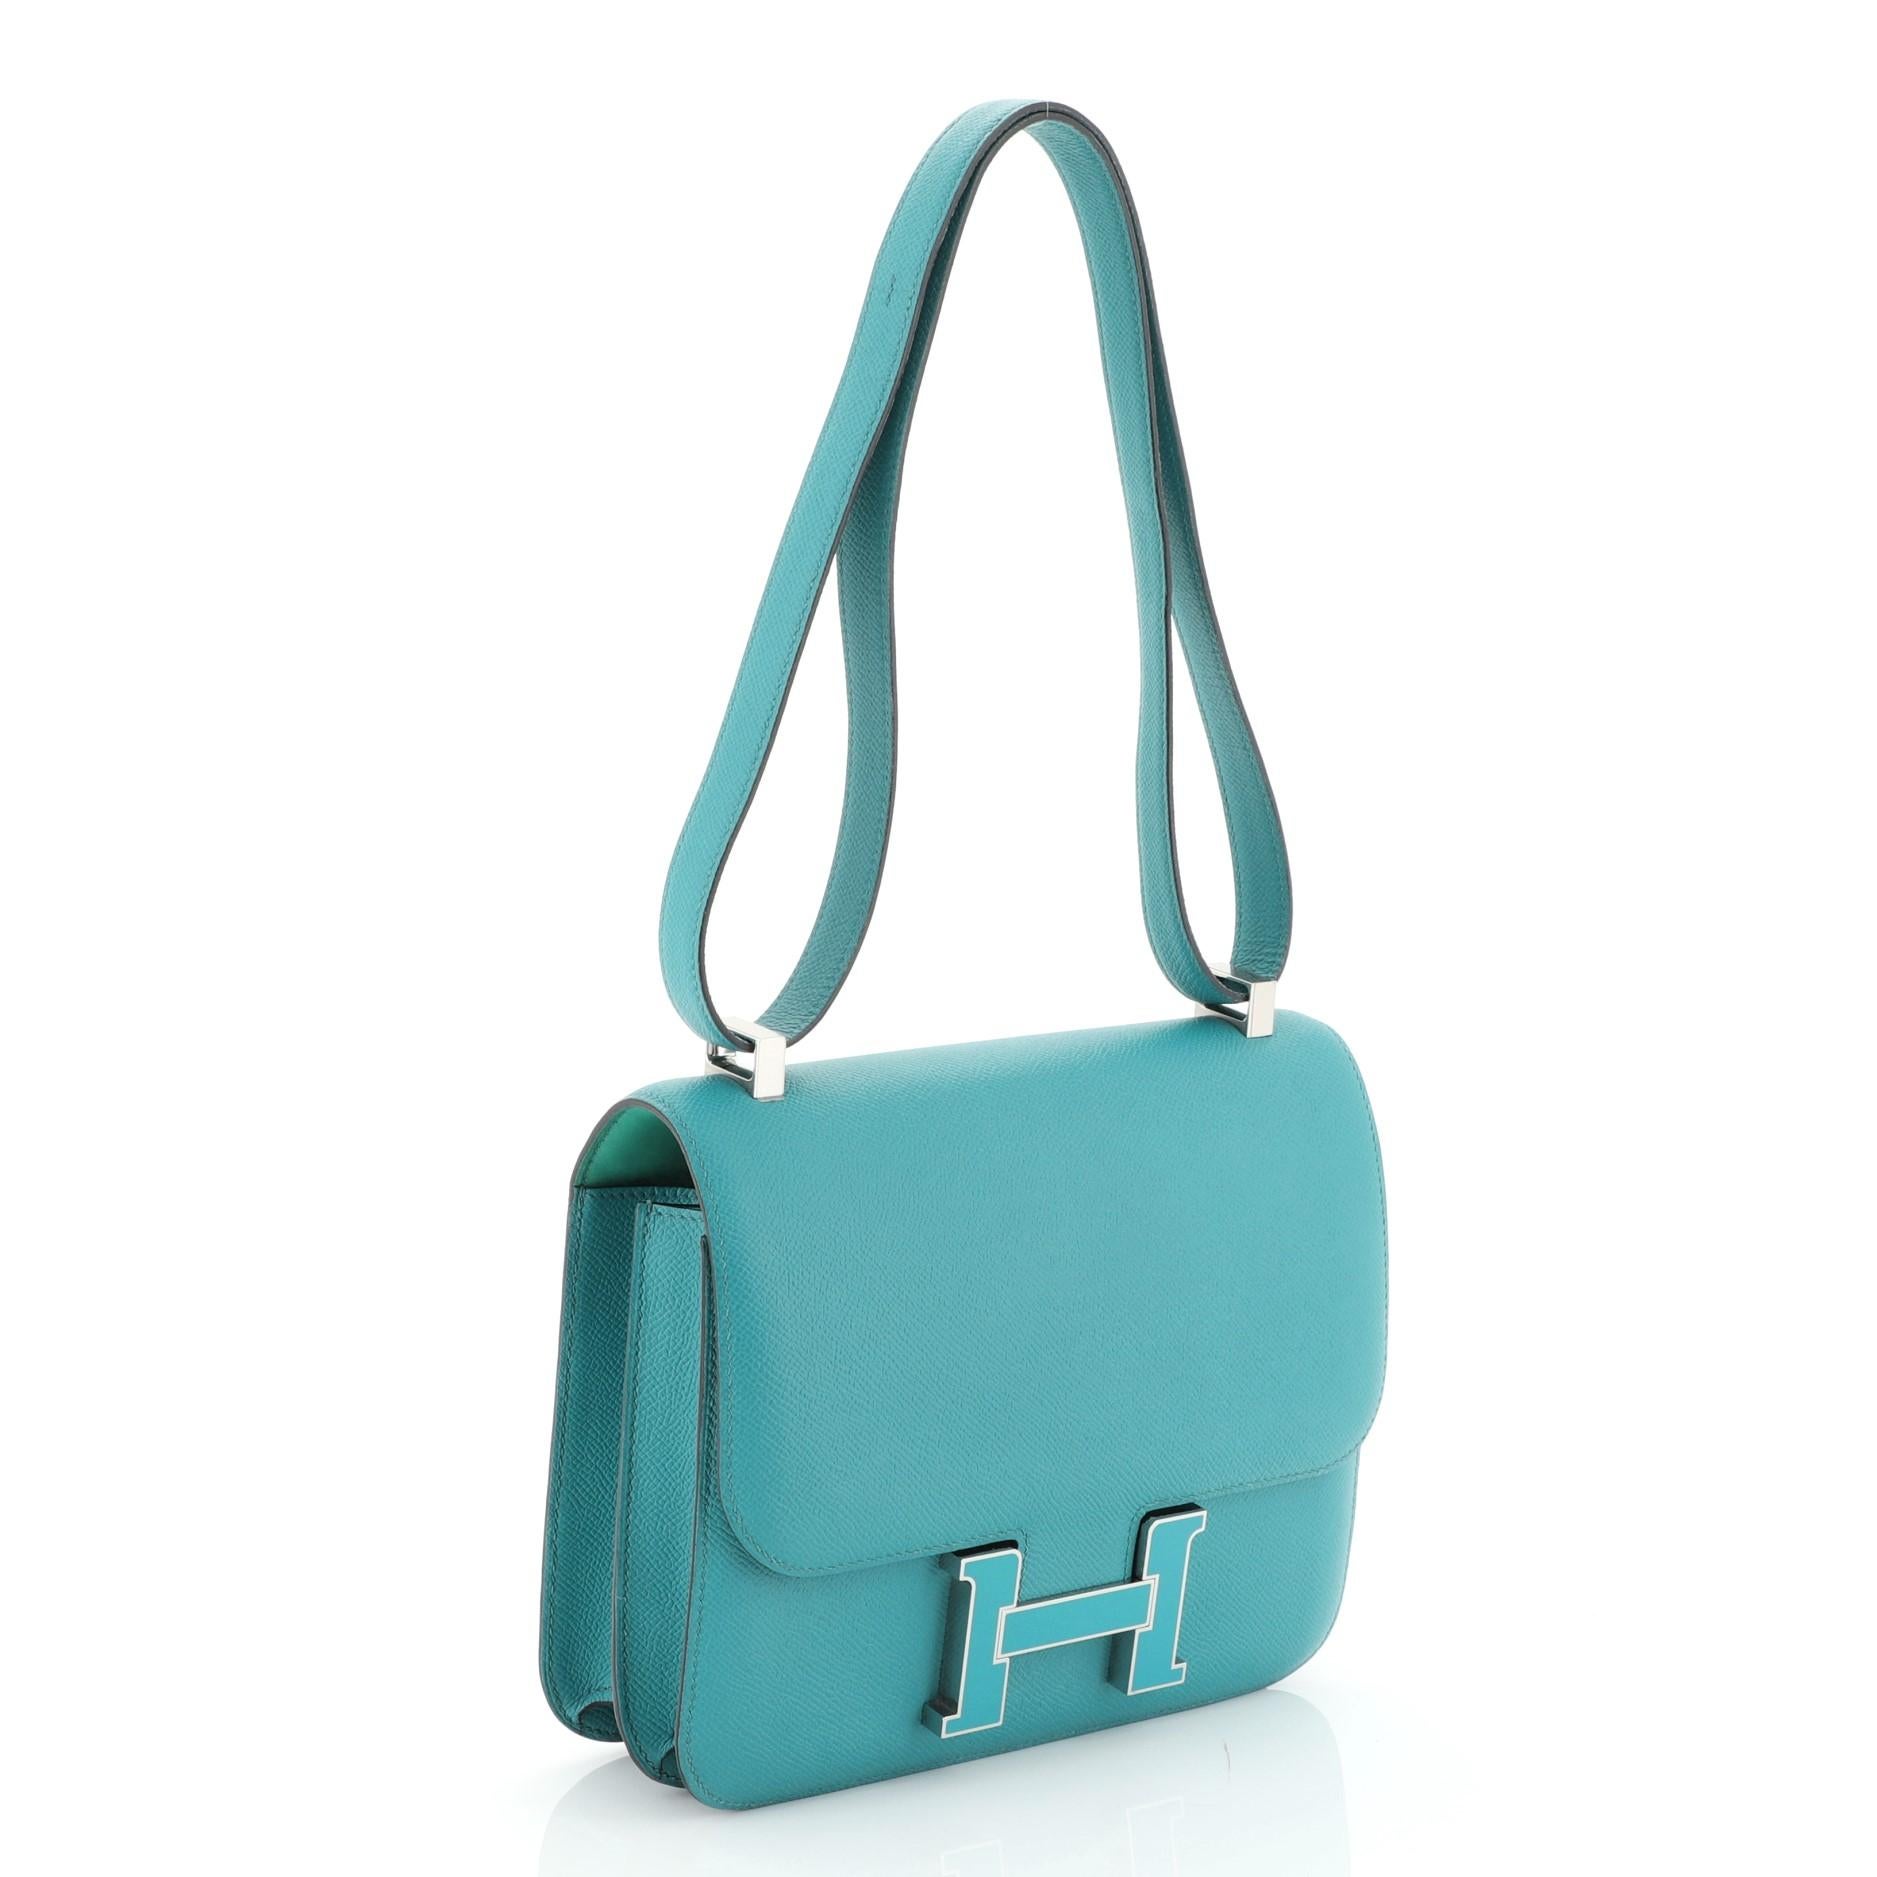 This Hermes Constance Handbag Epsom 24, crafted from Bleu Paon blue Epsom leather, features a long leather strap and palladium hardware. Its push-lock closure opens to a Menthe green Agneau leather interior divided into two compartments with zip and